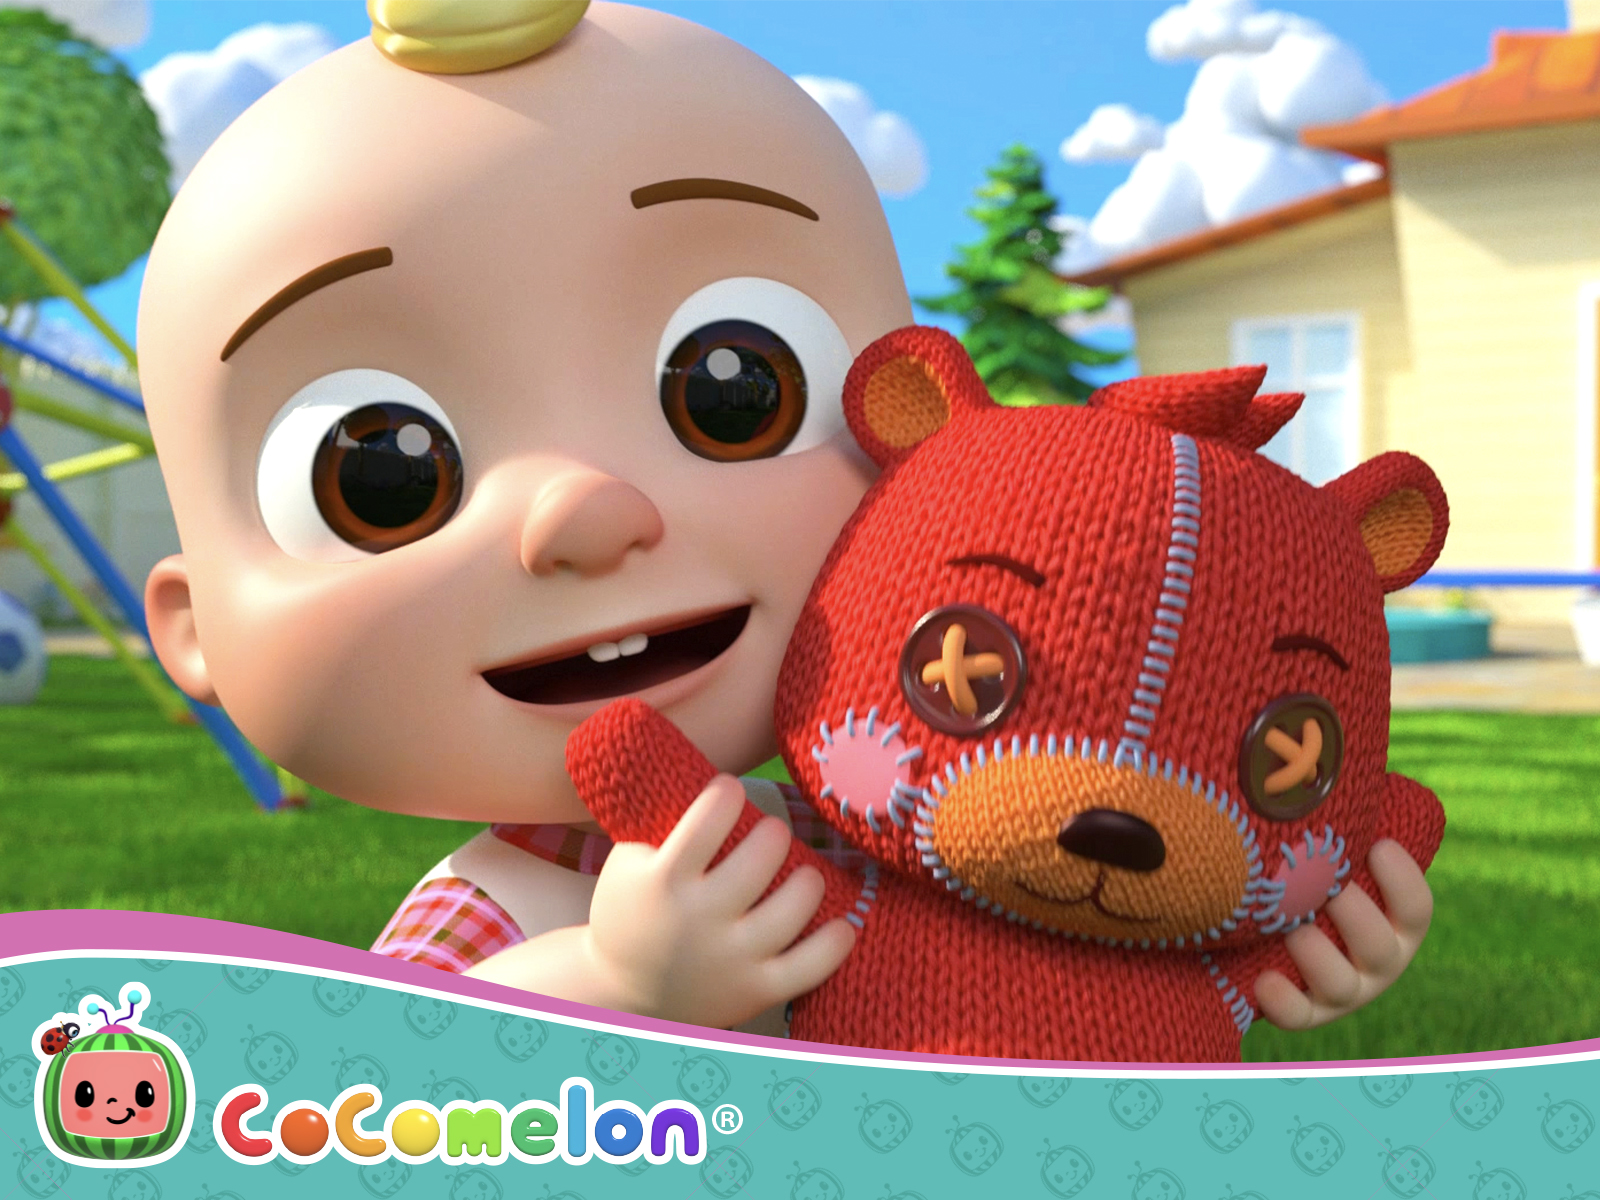 Cocomelon CoComelon Sing Alongs: Playdate With JJ (TV Episode 2020)